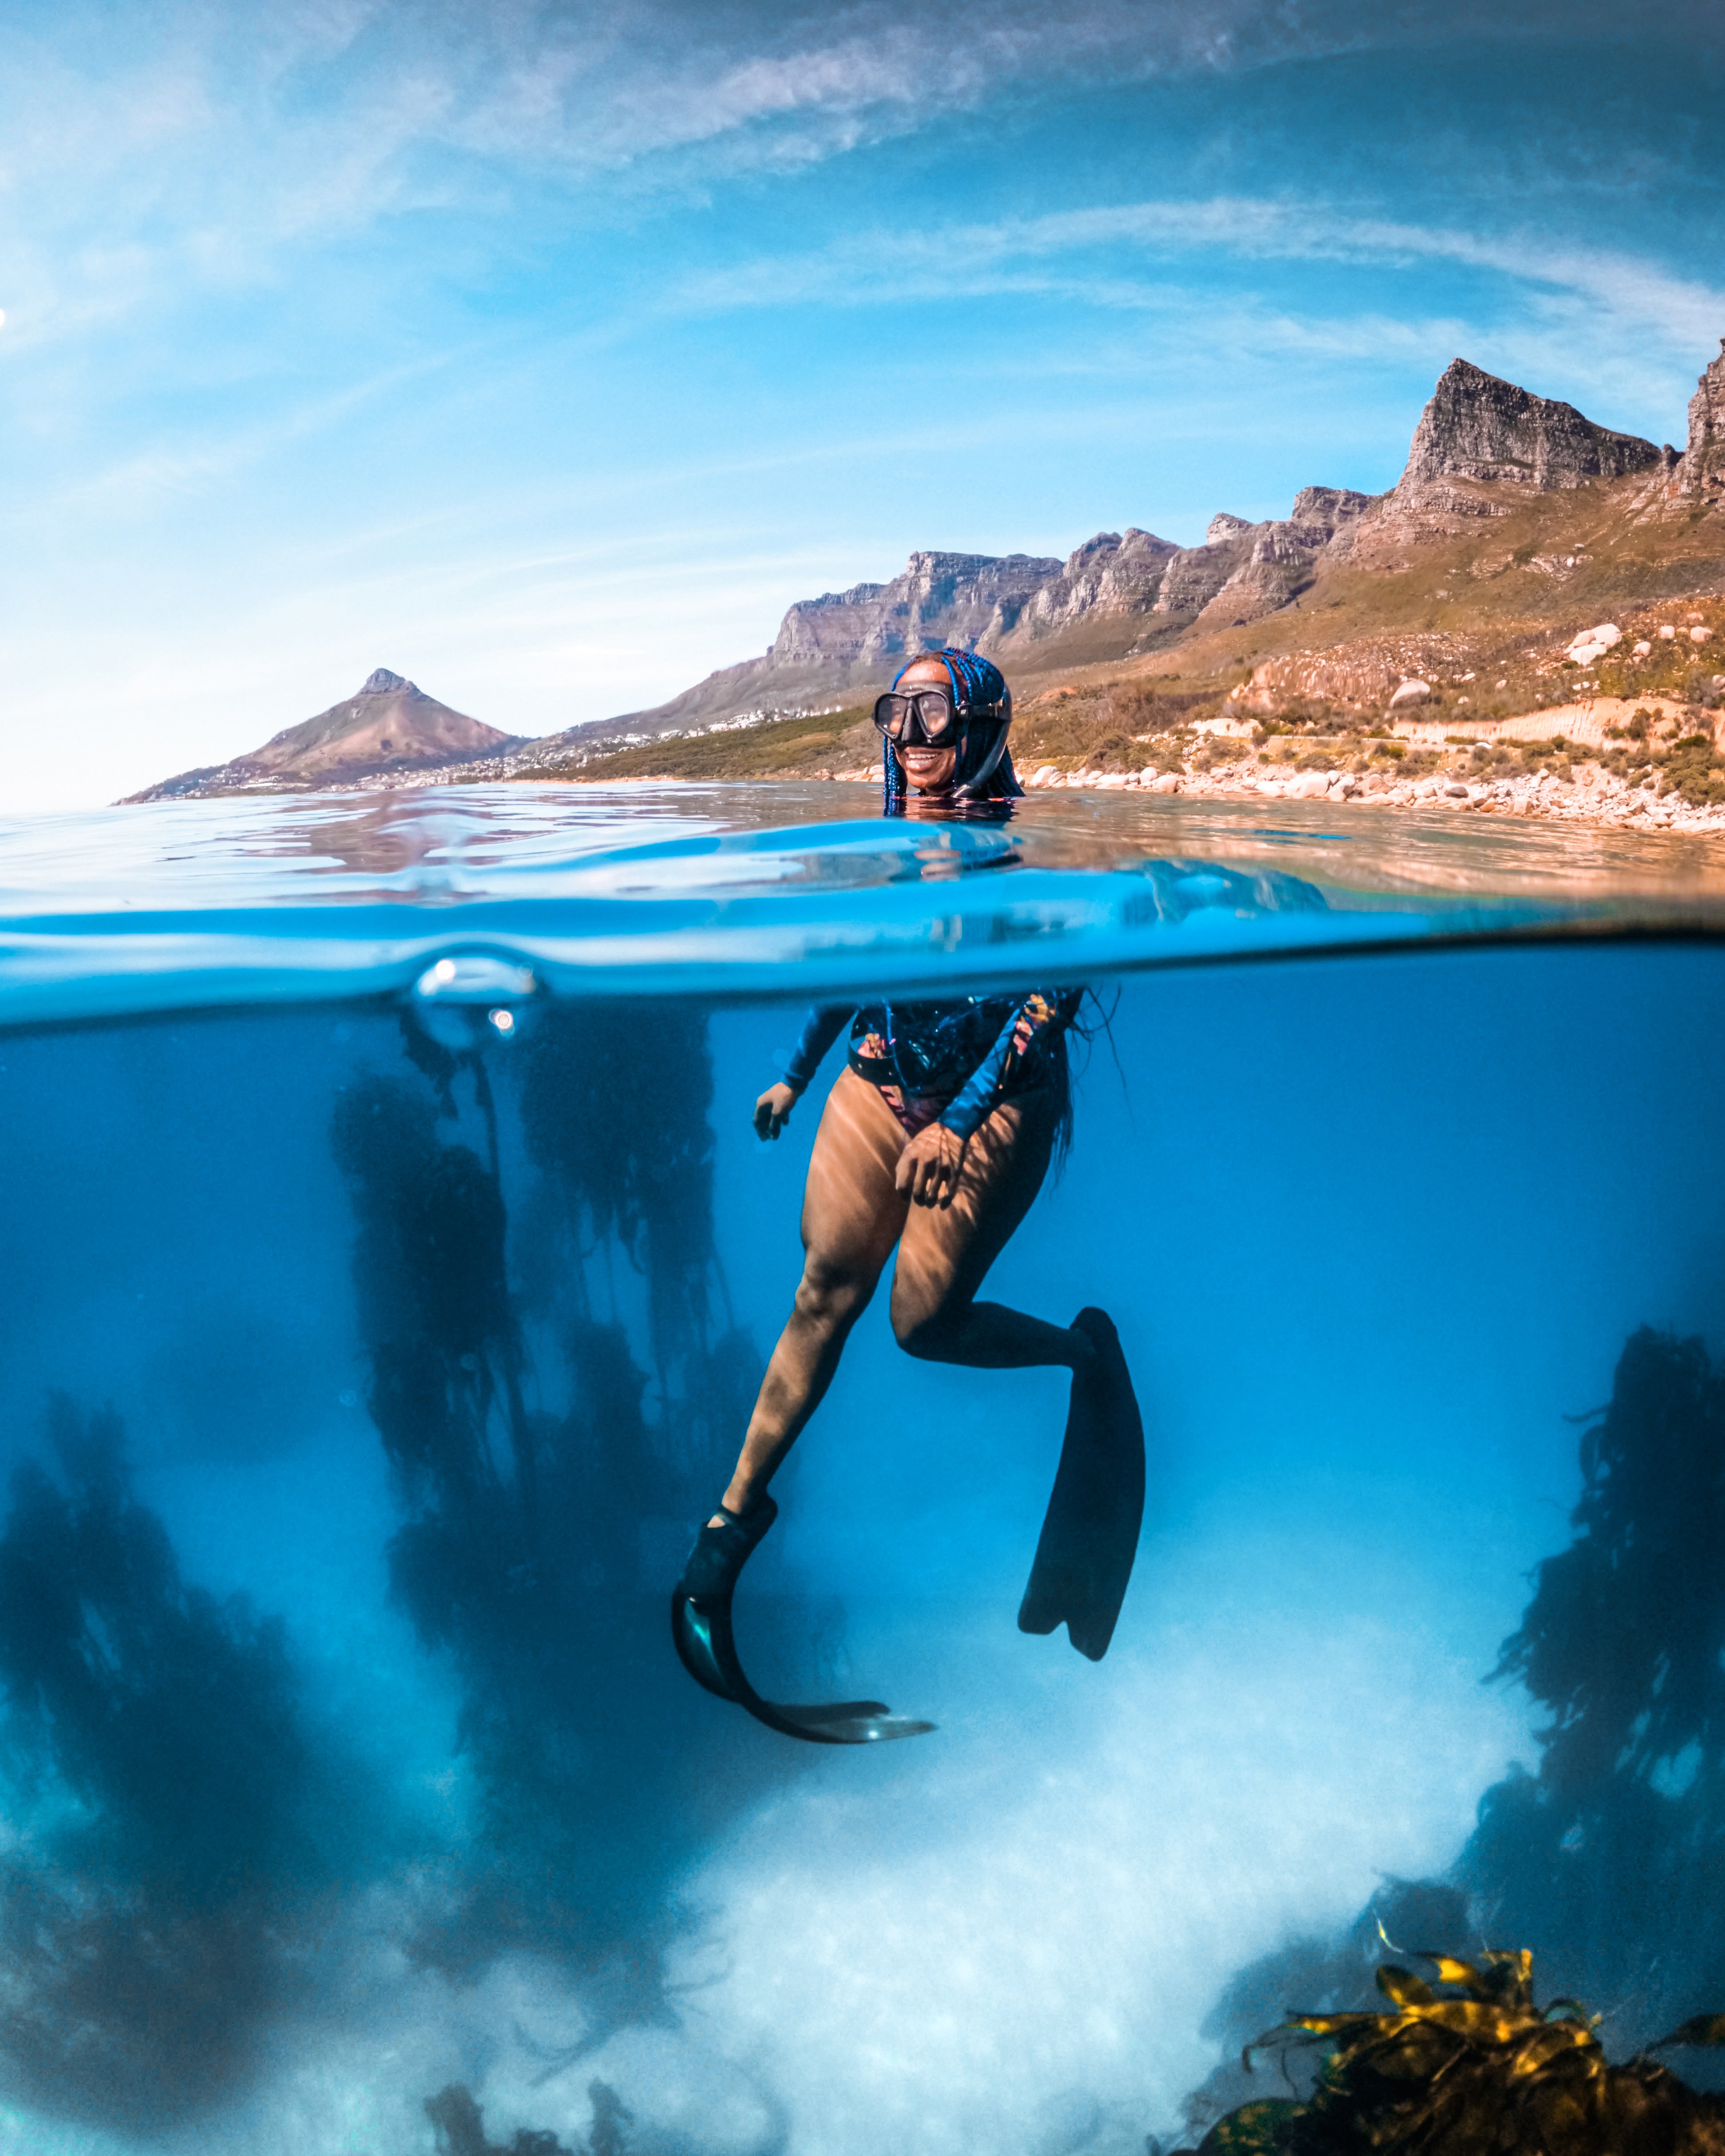 Can iPhone take pictures underwater?